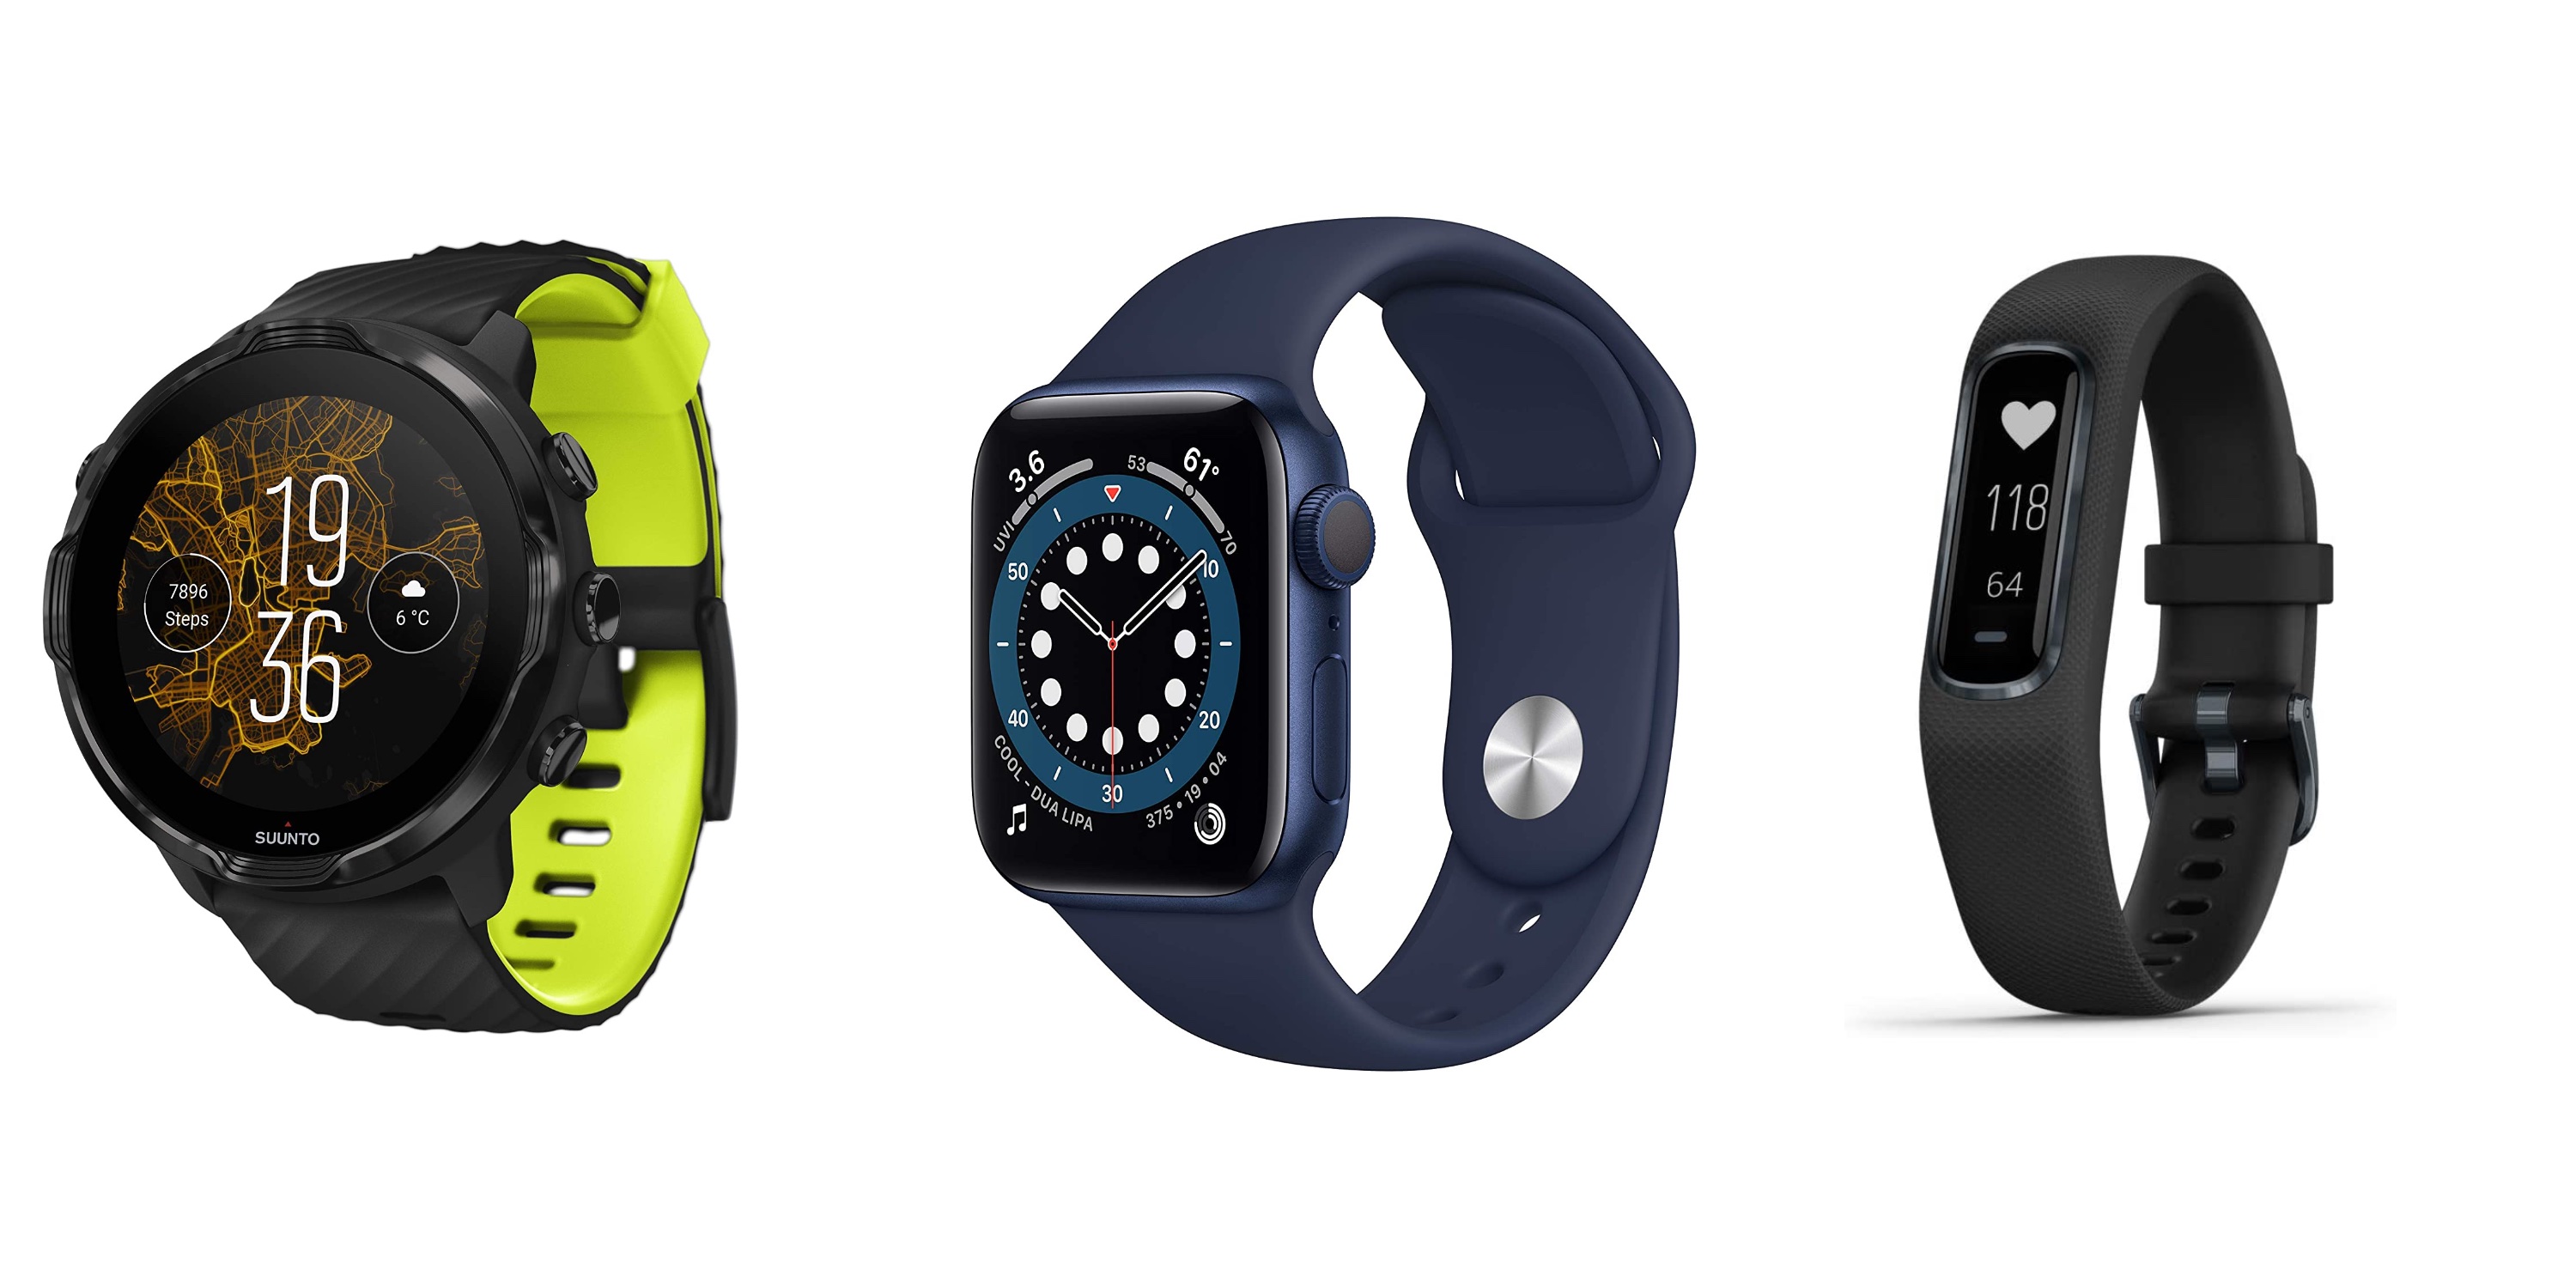 https://9to5mac.com/wp-content/uploads/sites/6/2020/12/smart-health-fitness-devices-gift-guide-smartwatch-tips.jpg?quality=82&strip=all